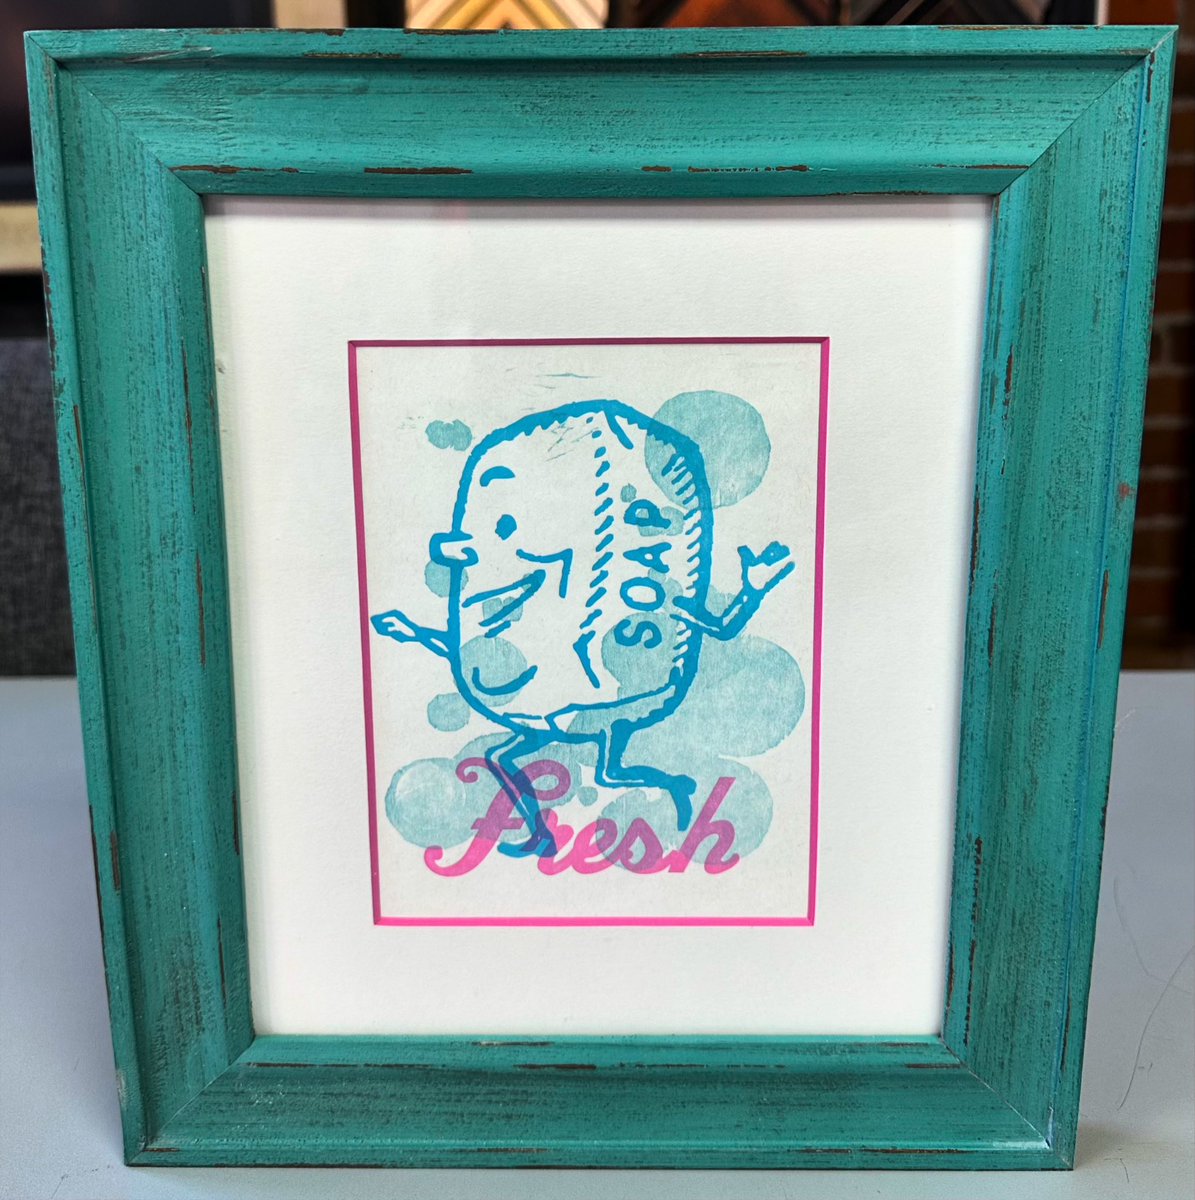 🧼 Dancing Soap print custom framed with color-core matting, museum glass and frame by AMPF Moulding! #art #denver #colorado #pictureframing #customframing #5280customframing #soap #dancingsoap @truvueglazing @Crescent_CP